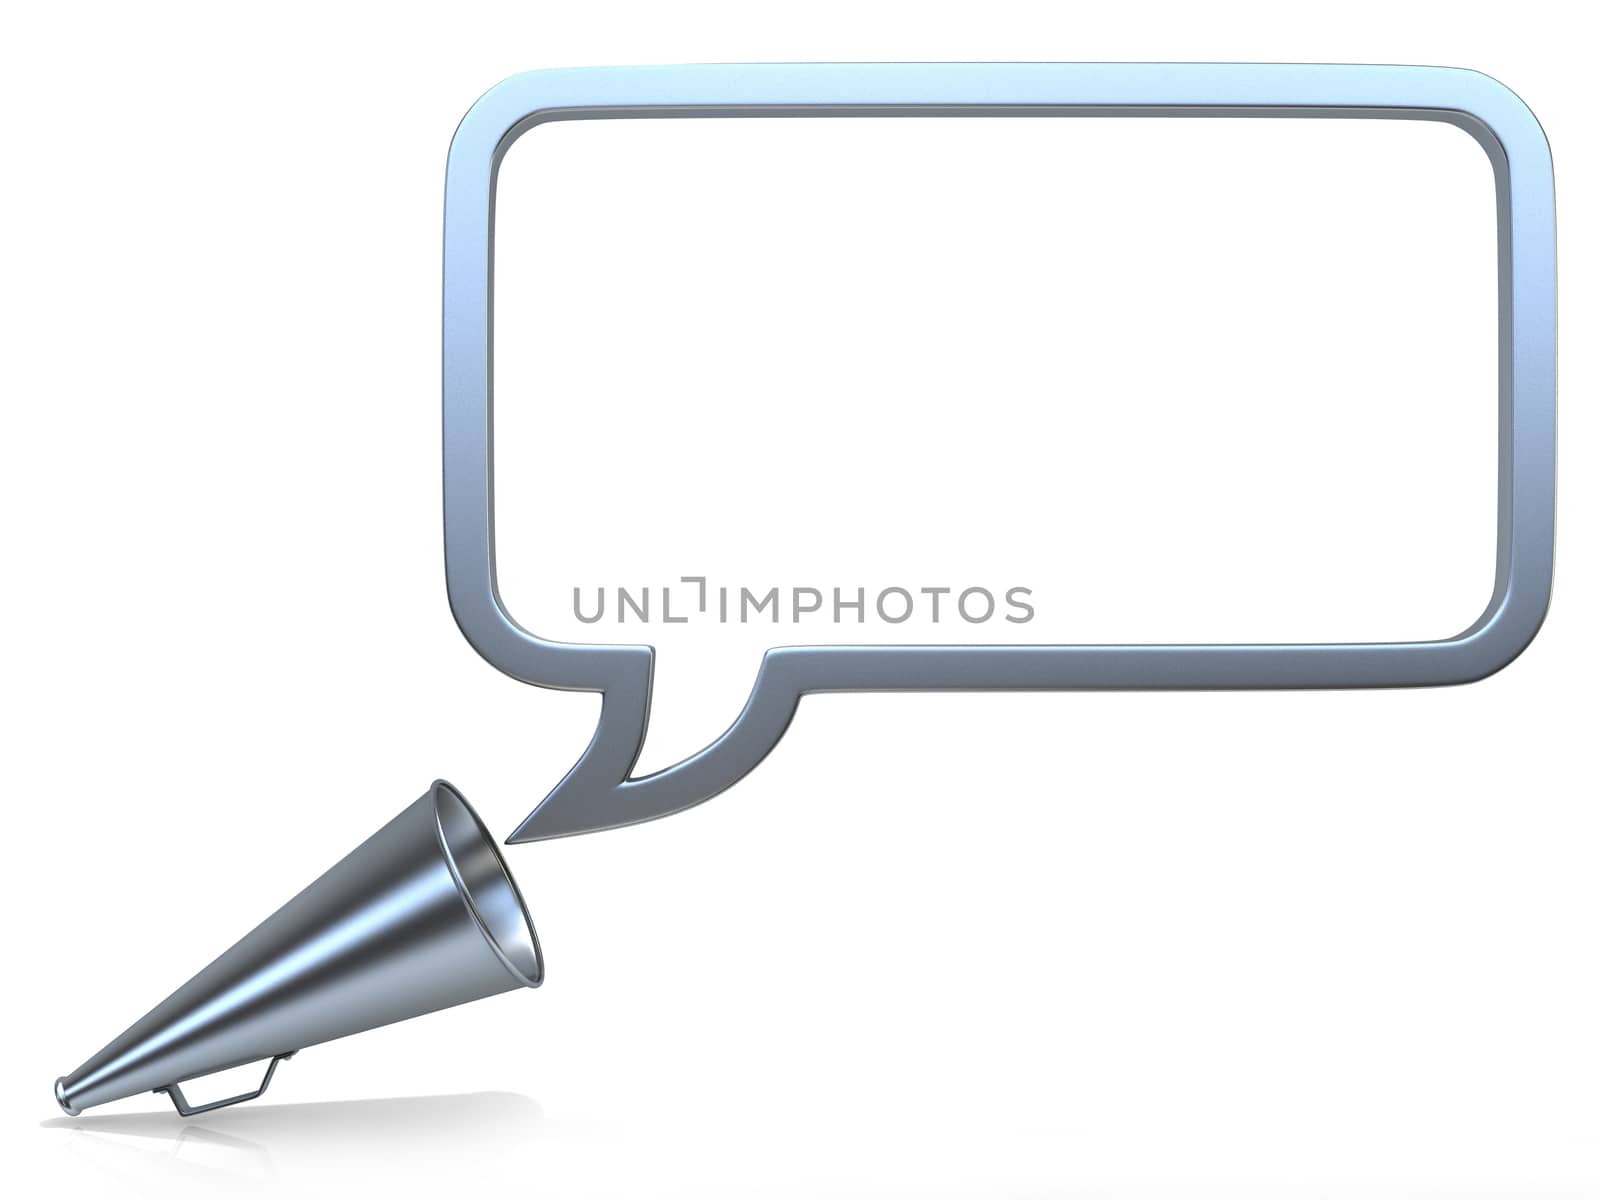 Retro - old style, steel megaphone with bubble speech. 3D render illustration, isolated on white background.